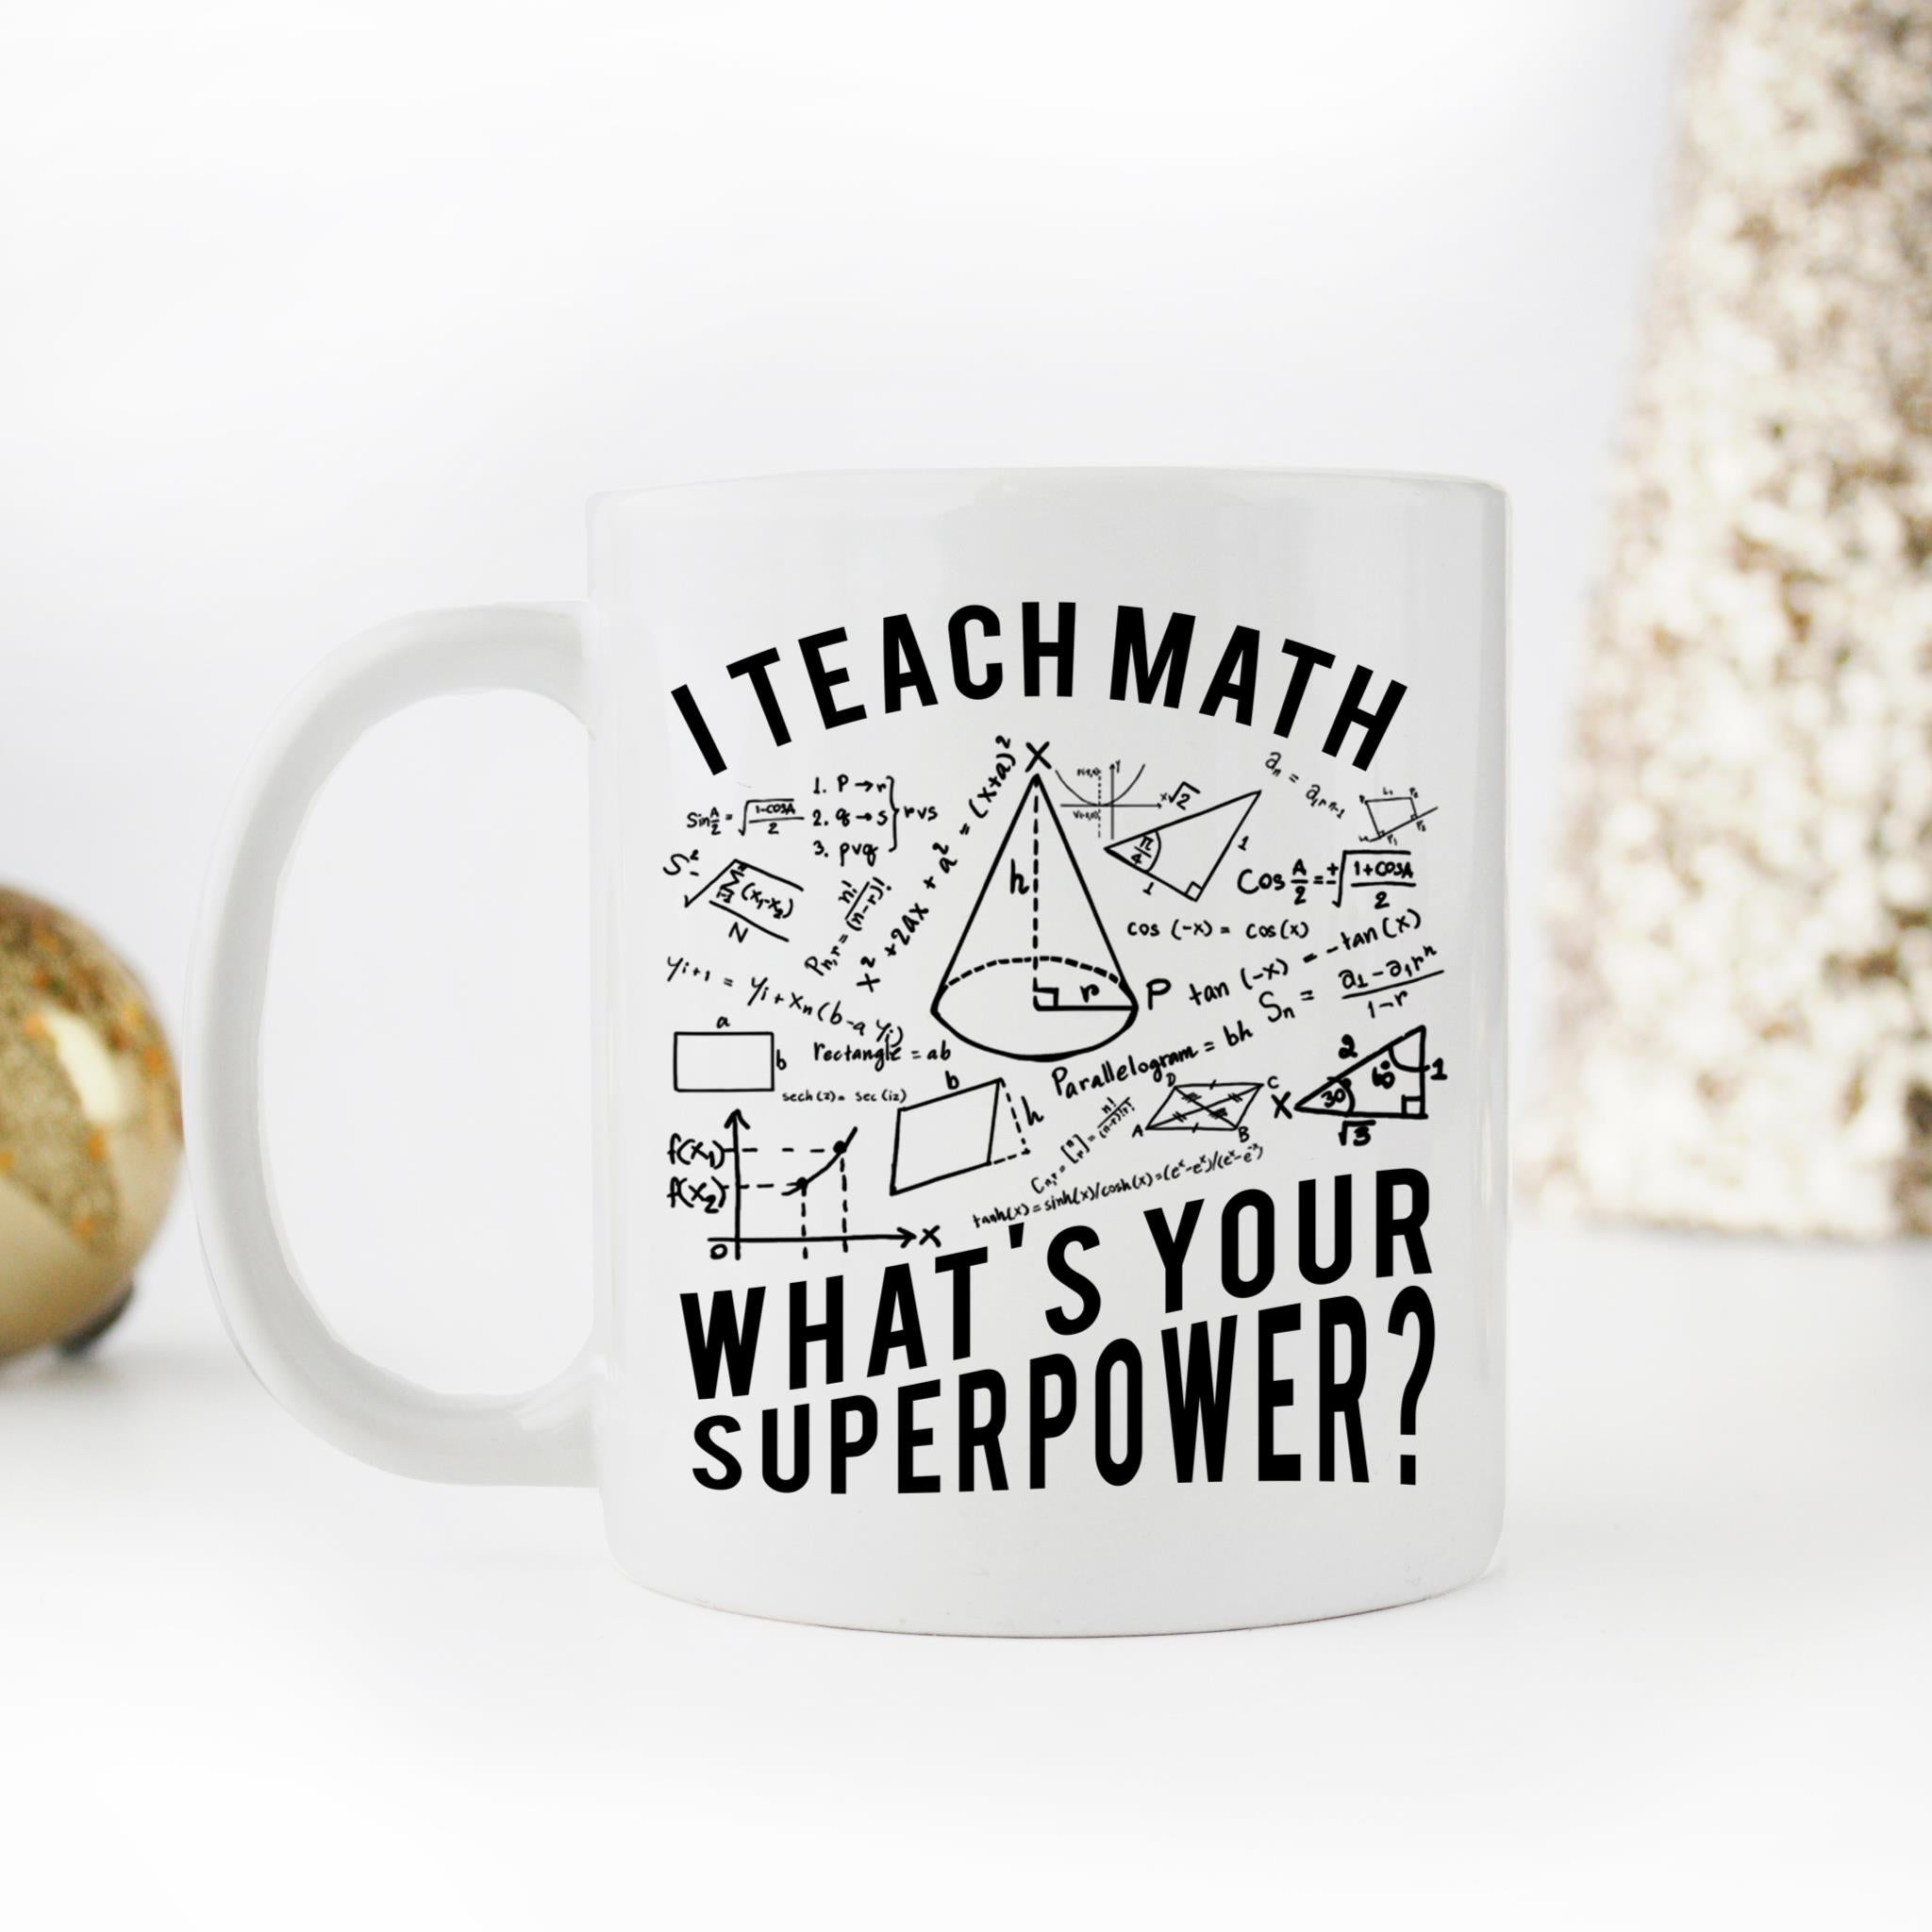 Skitongifts Coffee Mug Funny Ceramic Novelty NH06012022 - I Teach Math What's Your Superpower Gtycvfe